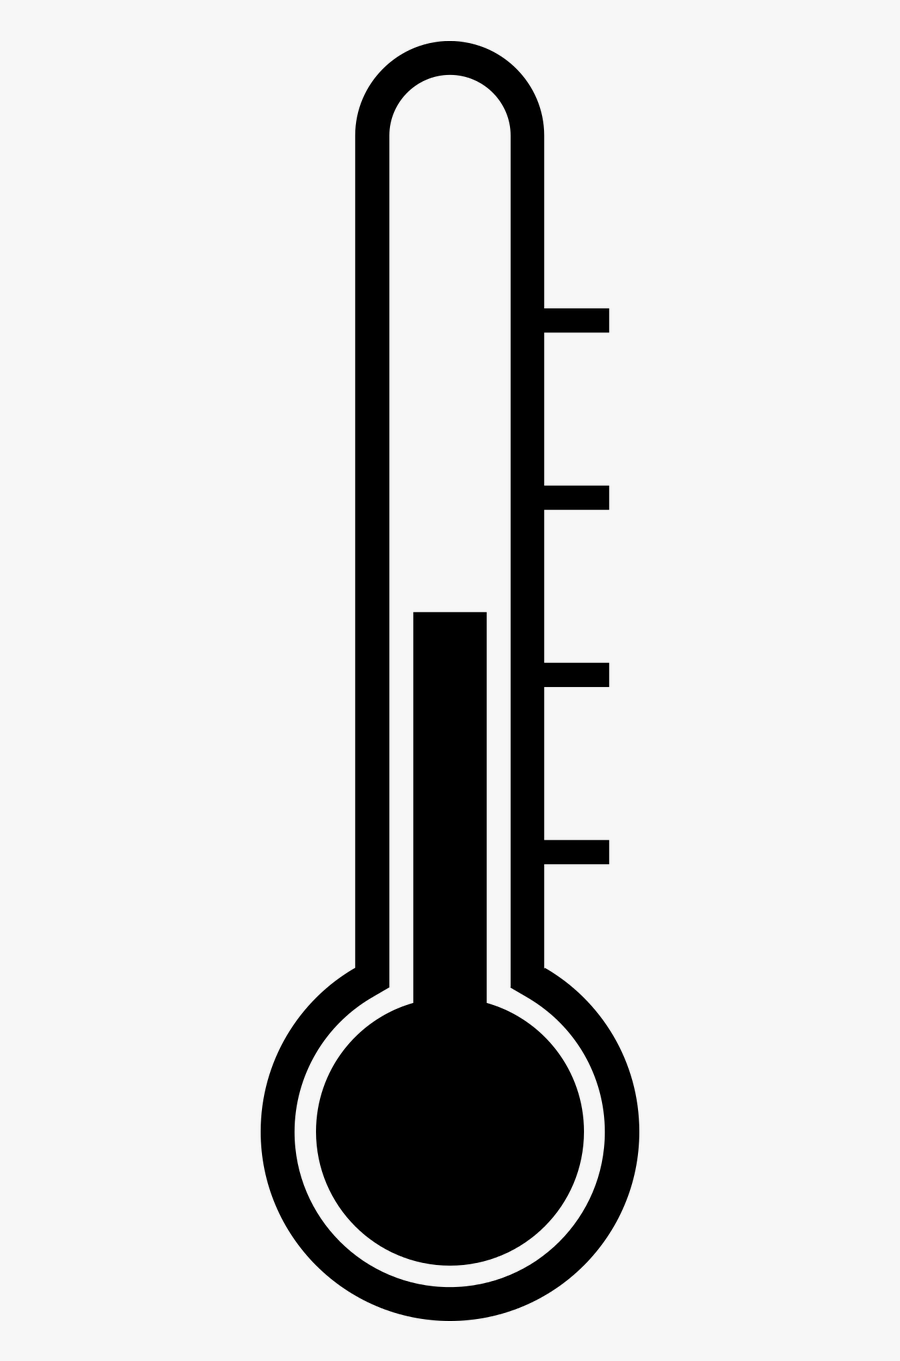 Adjust Temperature Cold-1293305 - Thermometer Clipart Black And White, Transparent Clipart